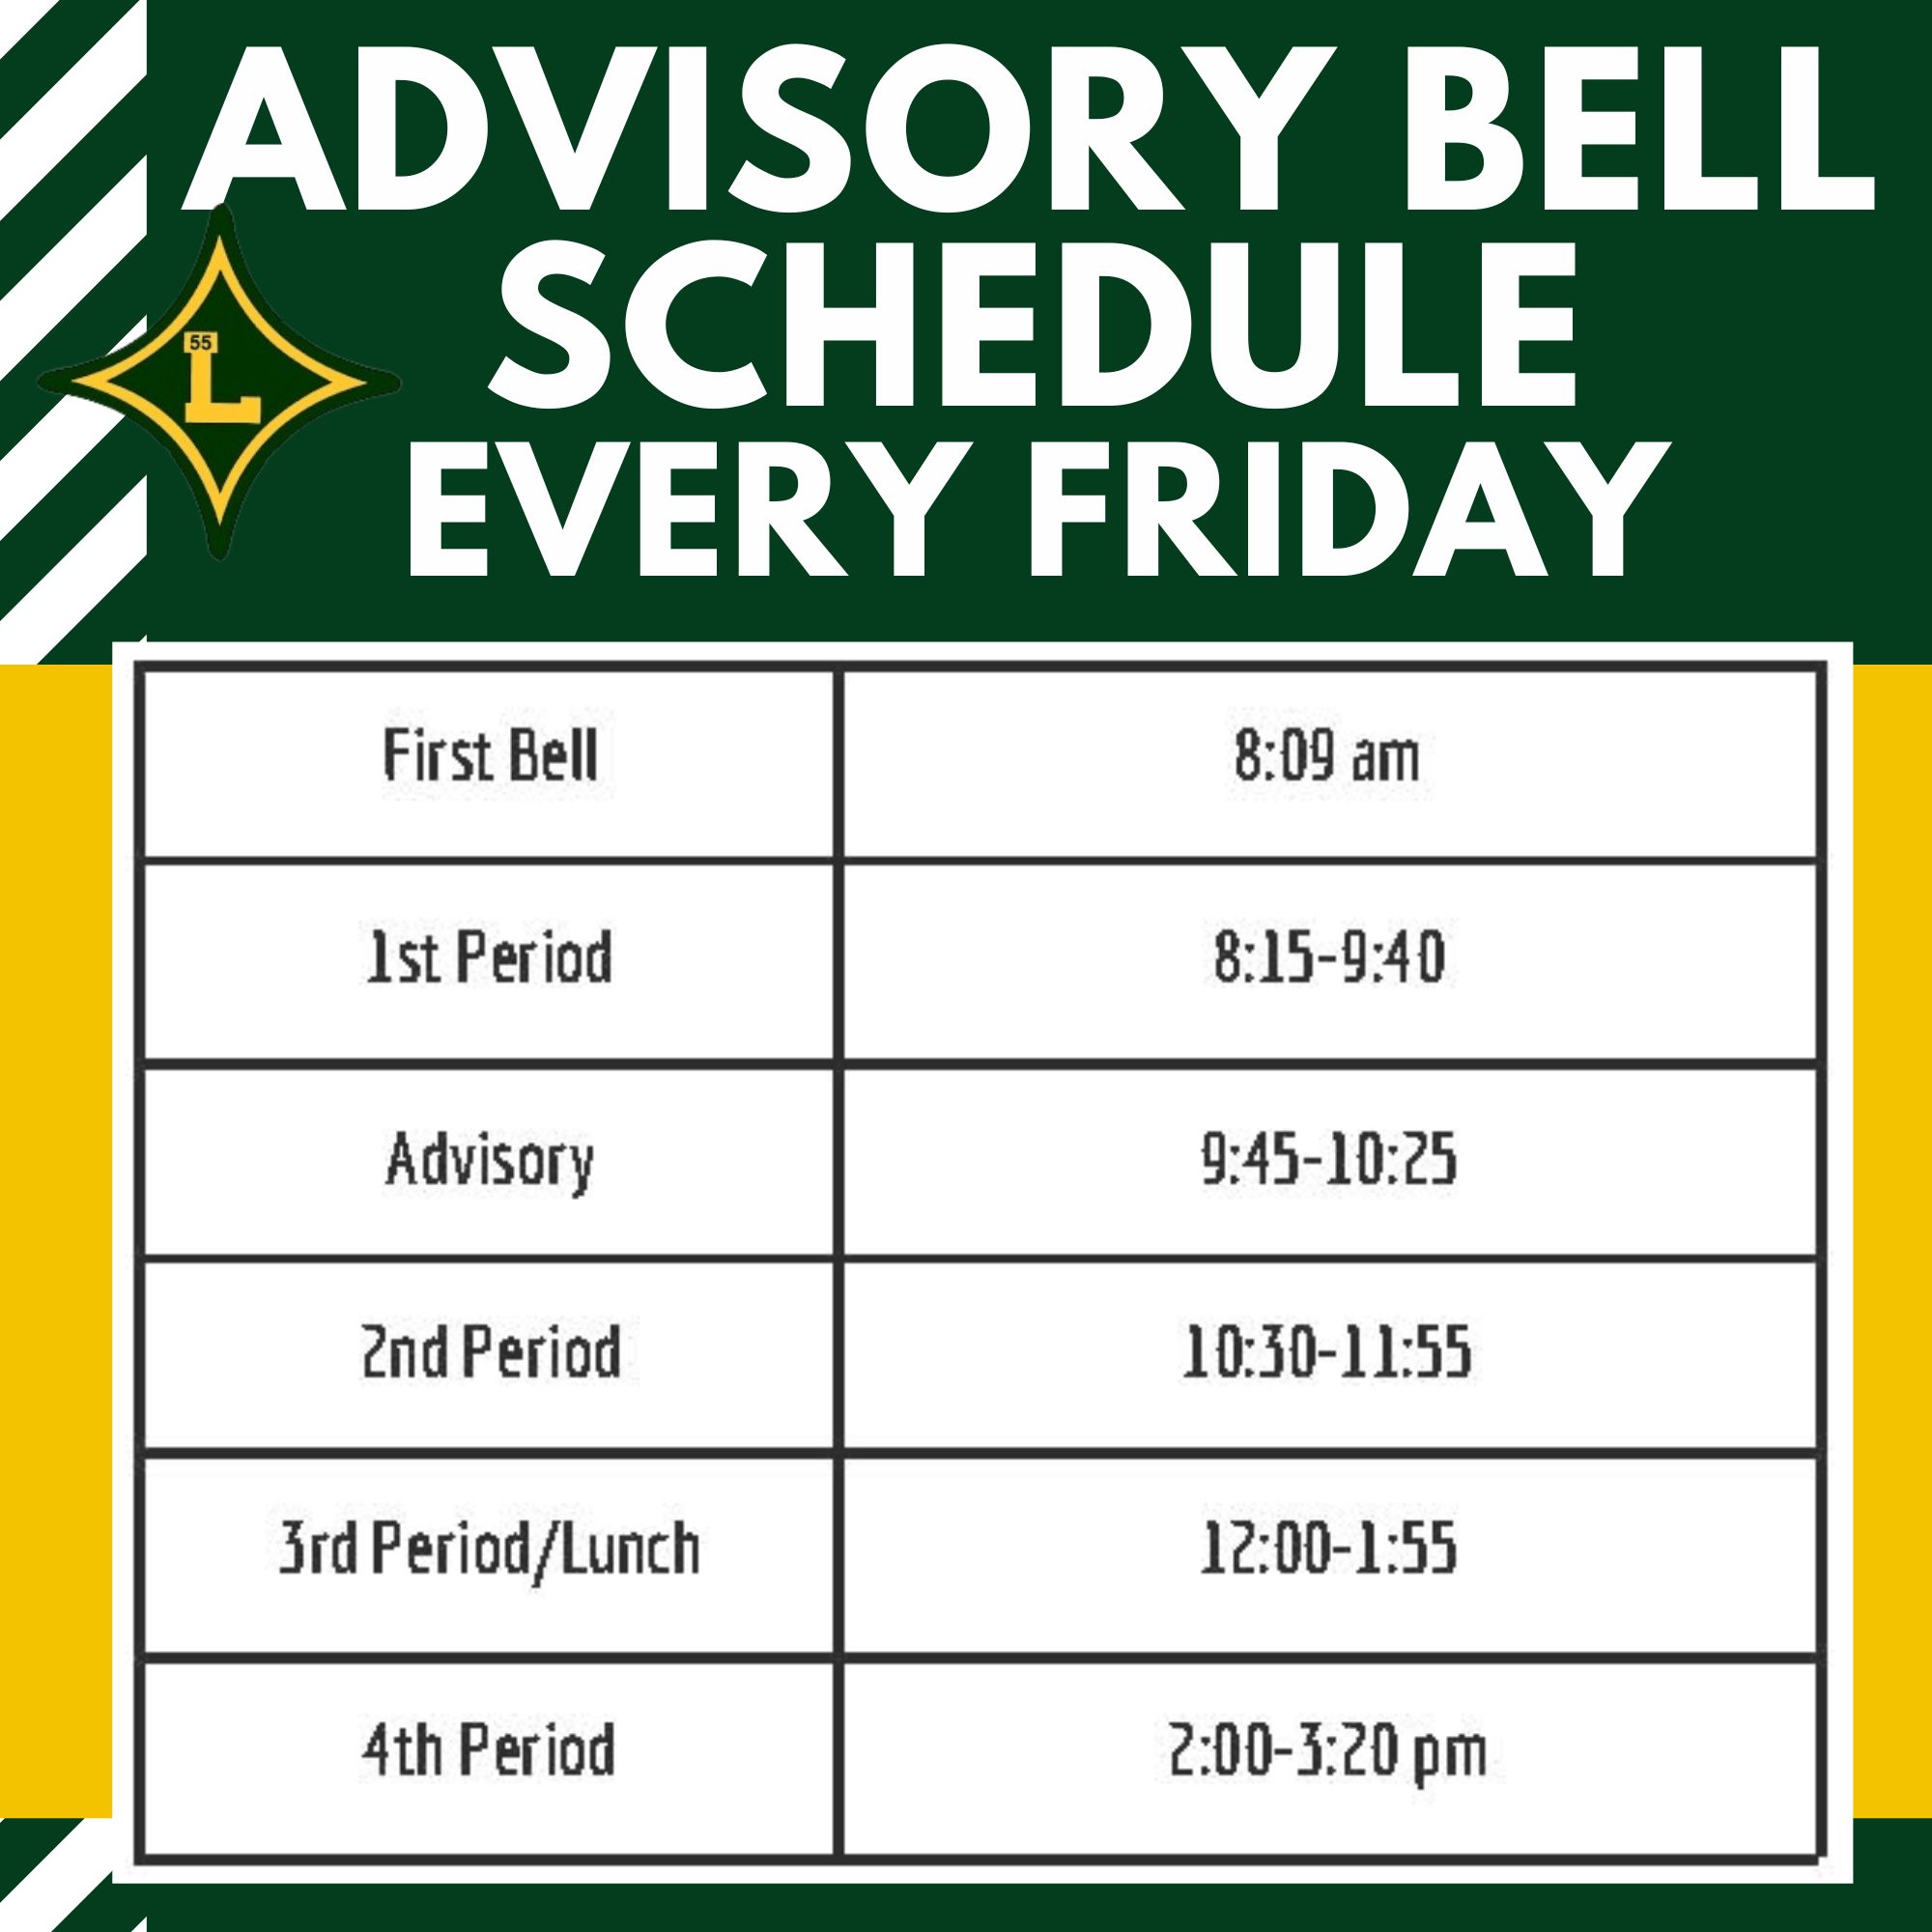 Advisory Bell Schedule - Every Friday